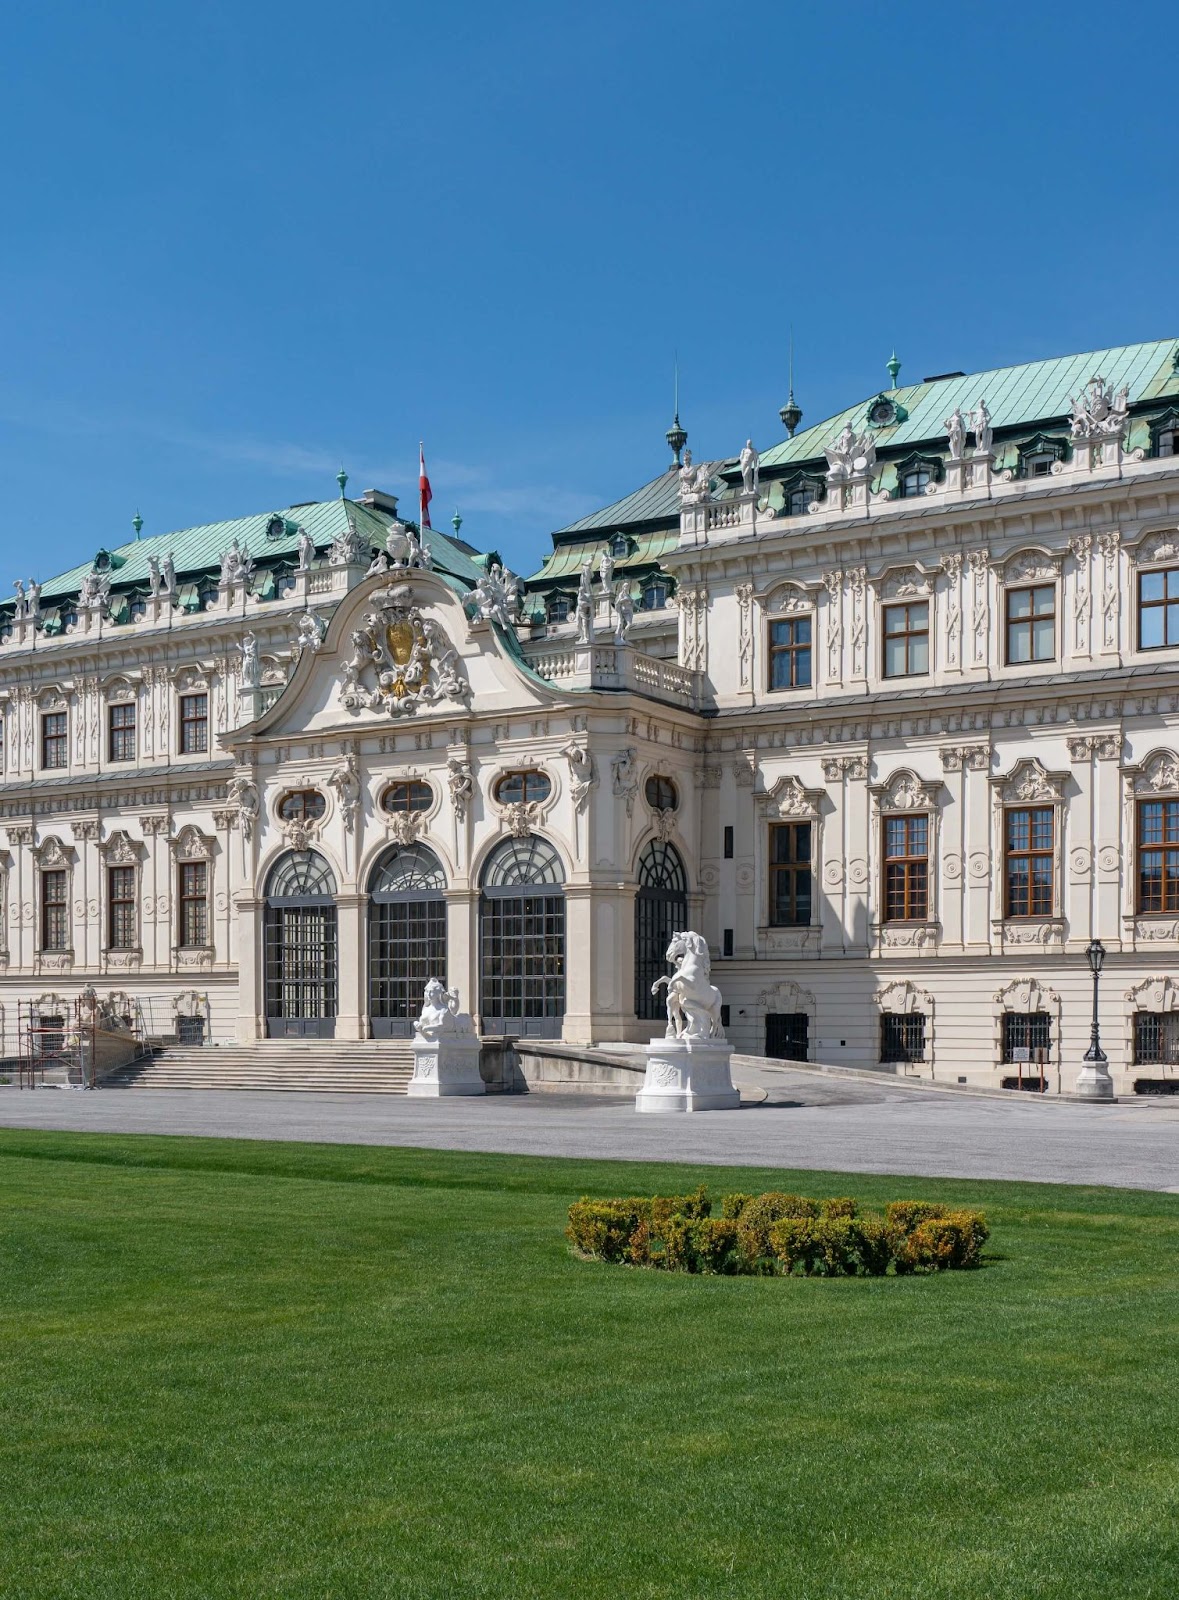 1 day in Vienna, Belvedere Palace was the summer residence for Prince Eugene of Savoy